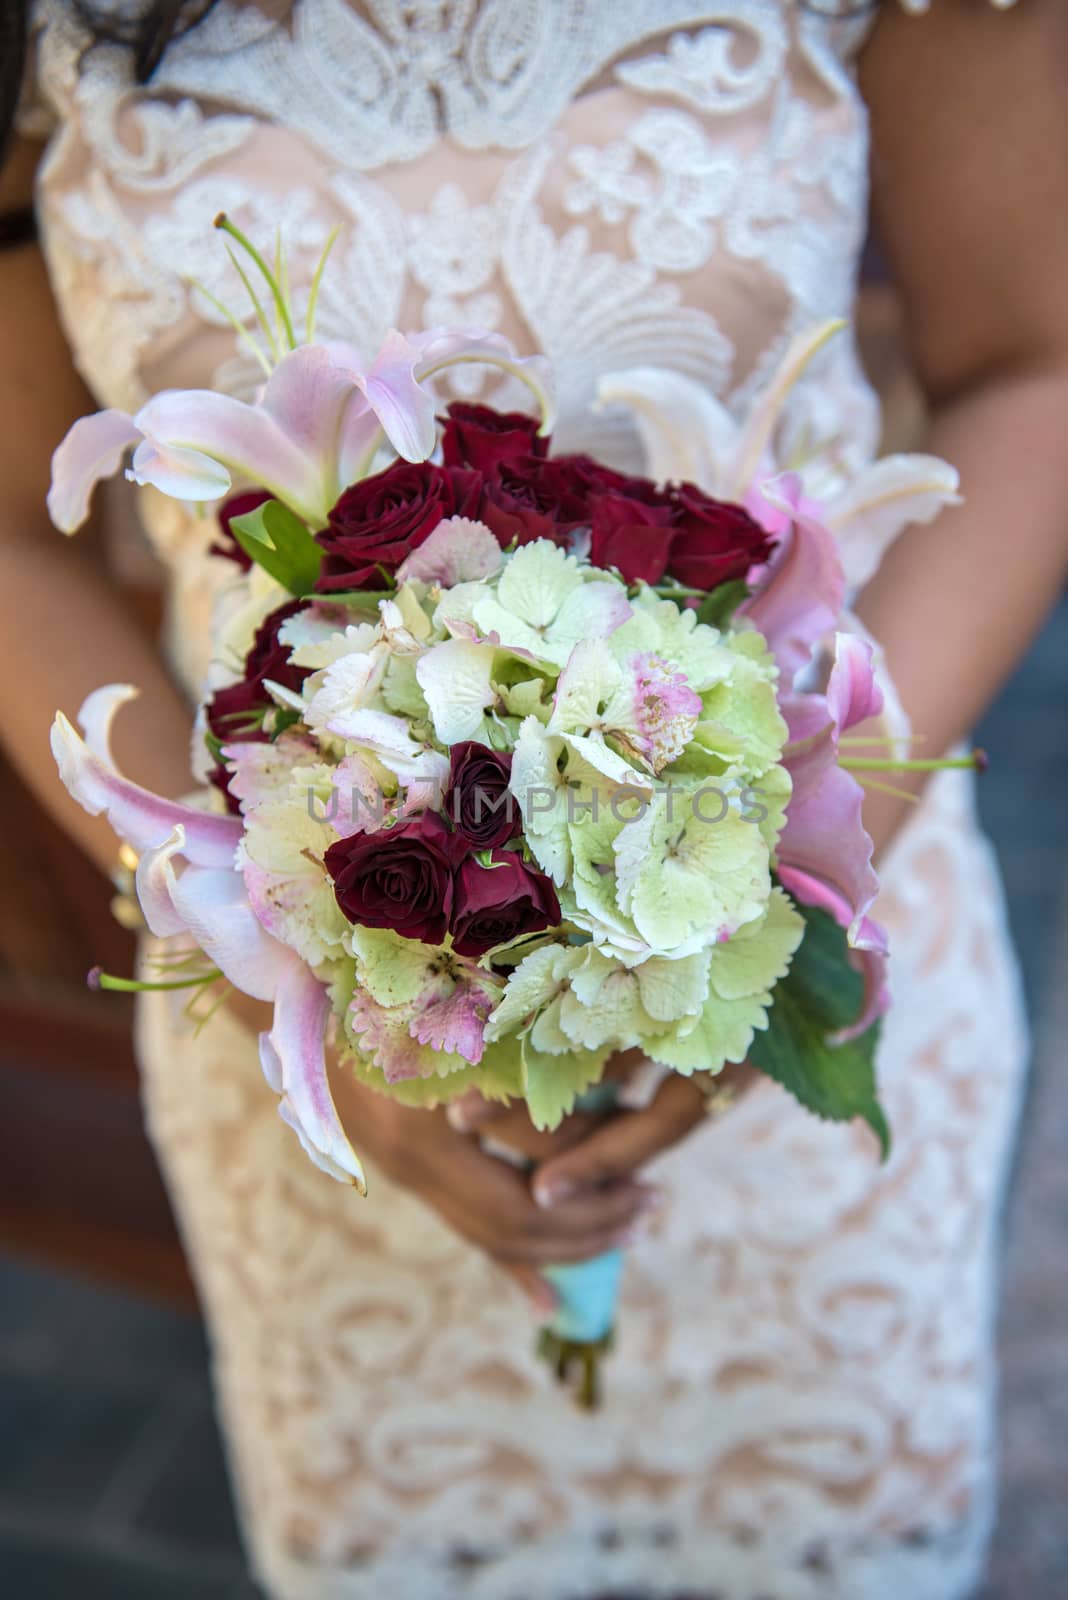 Bride holding a bouquet by gregory21